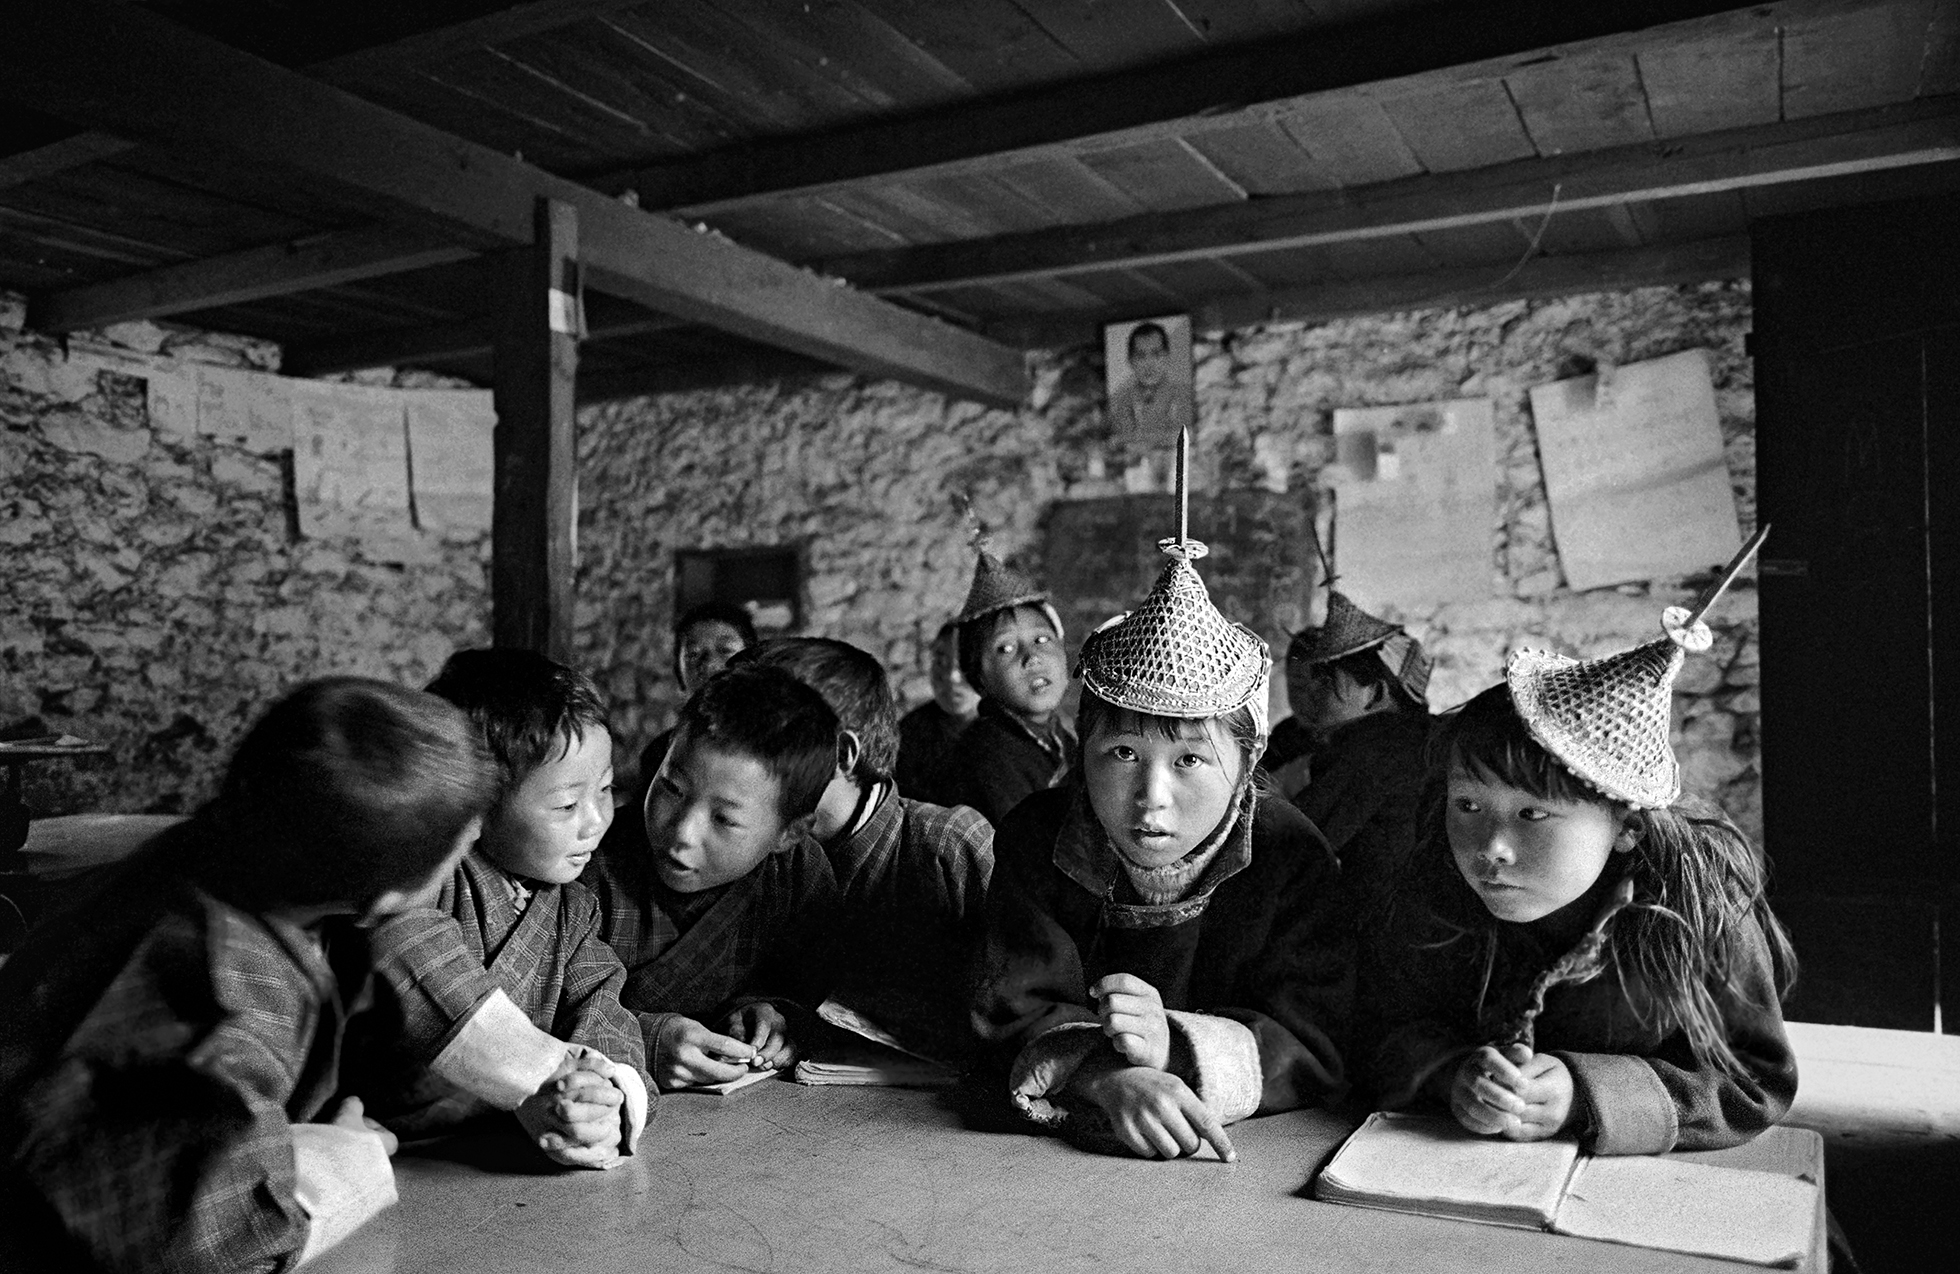 A group of Bhutanese children crowding around a table in a Bhutanese school.